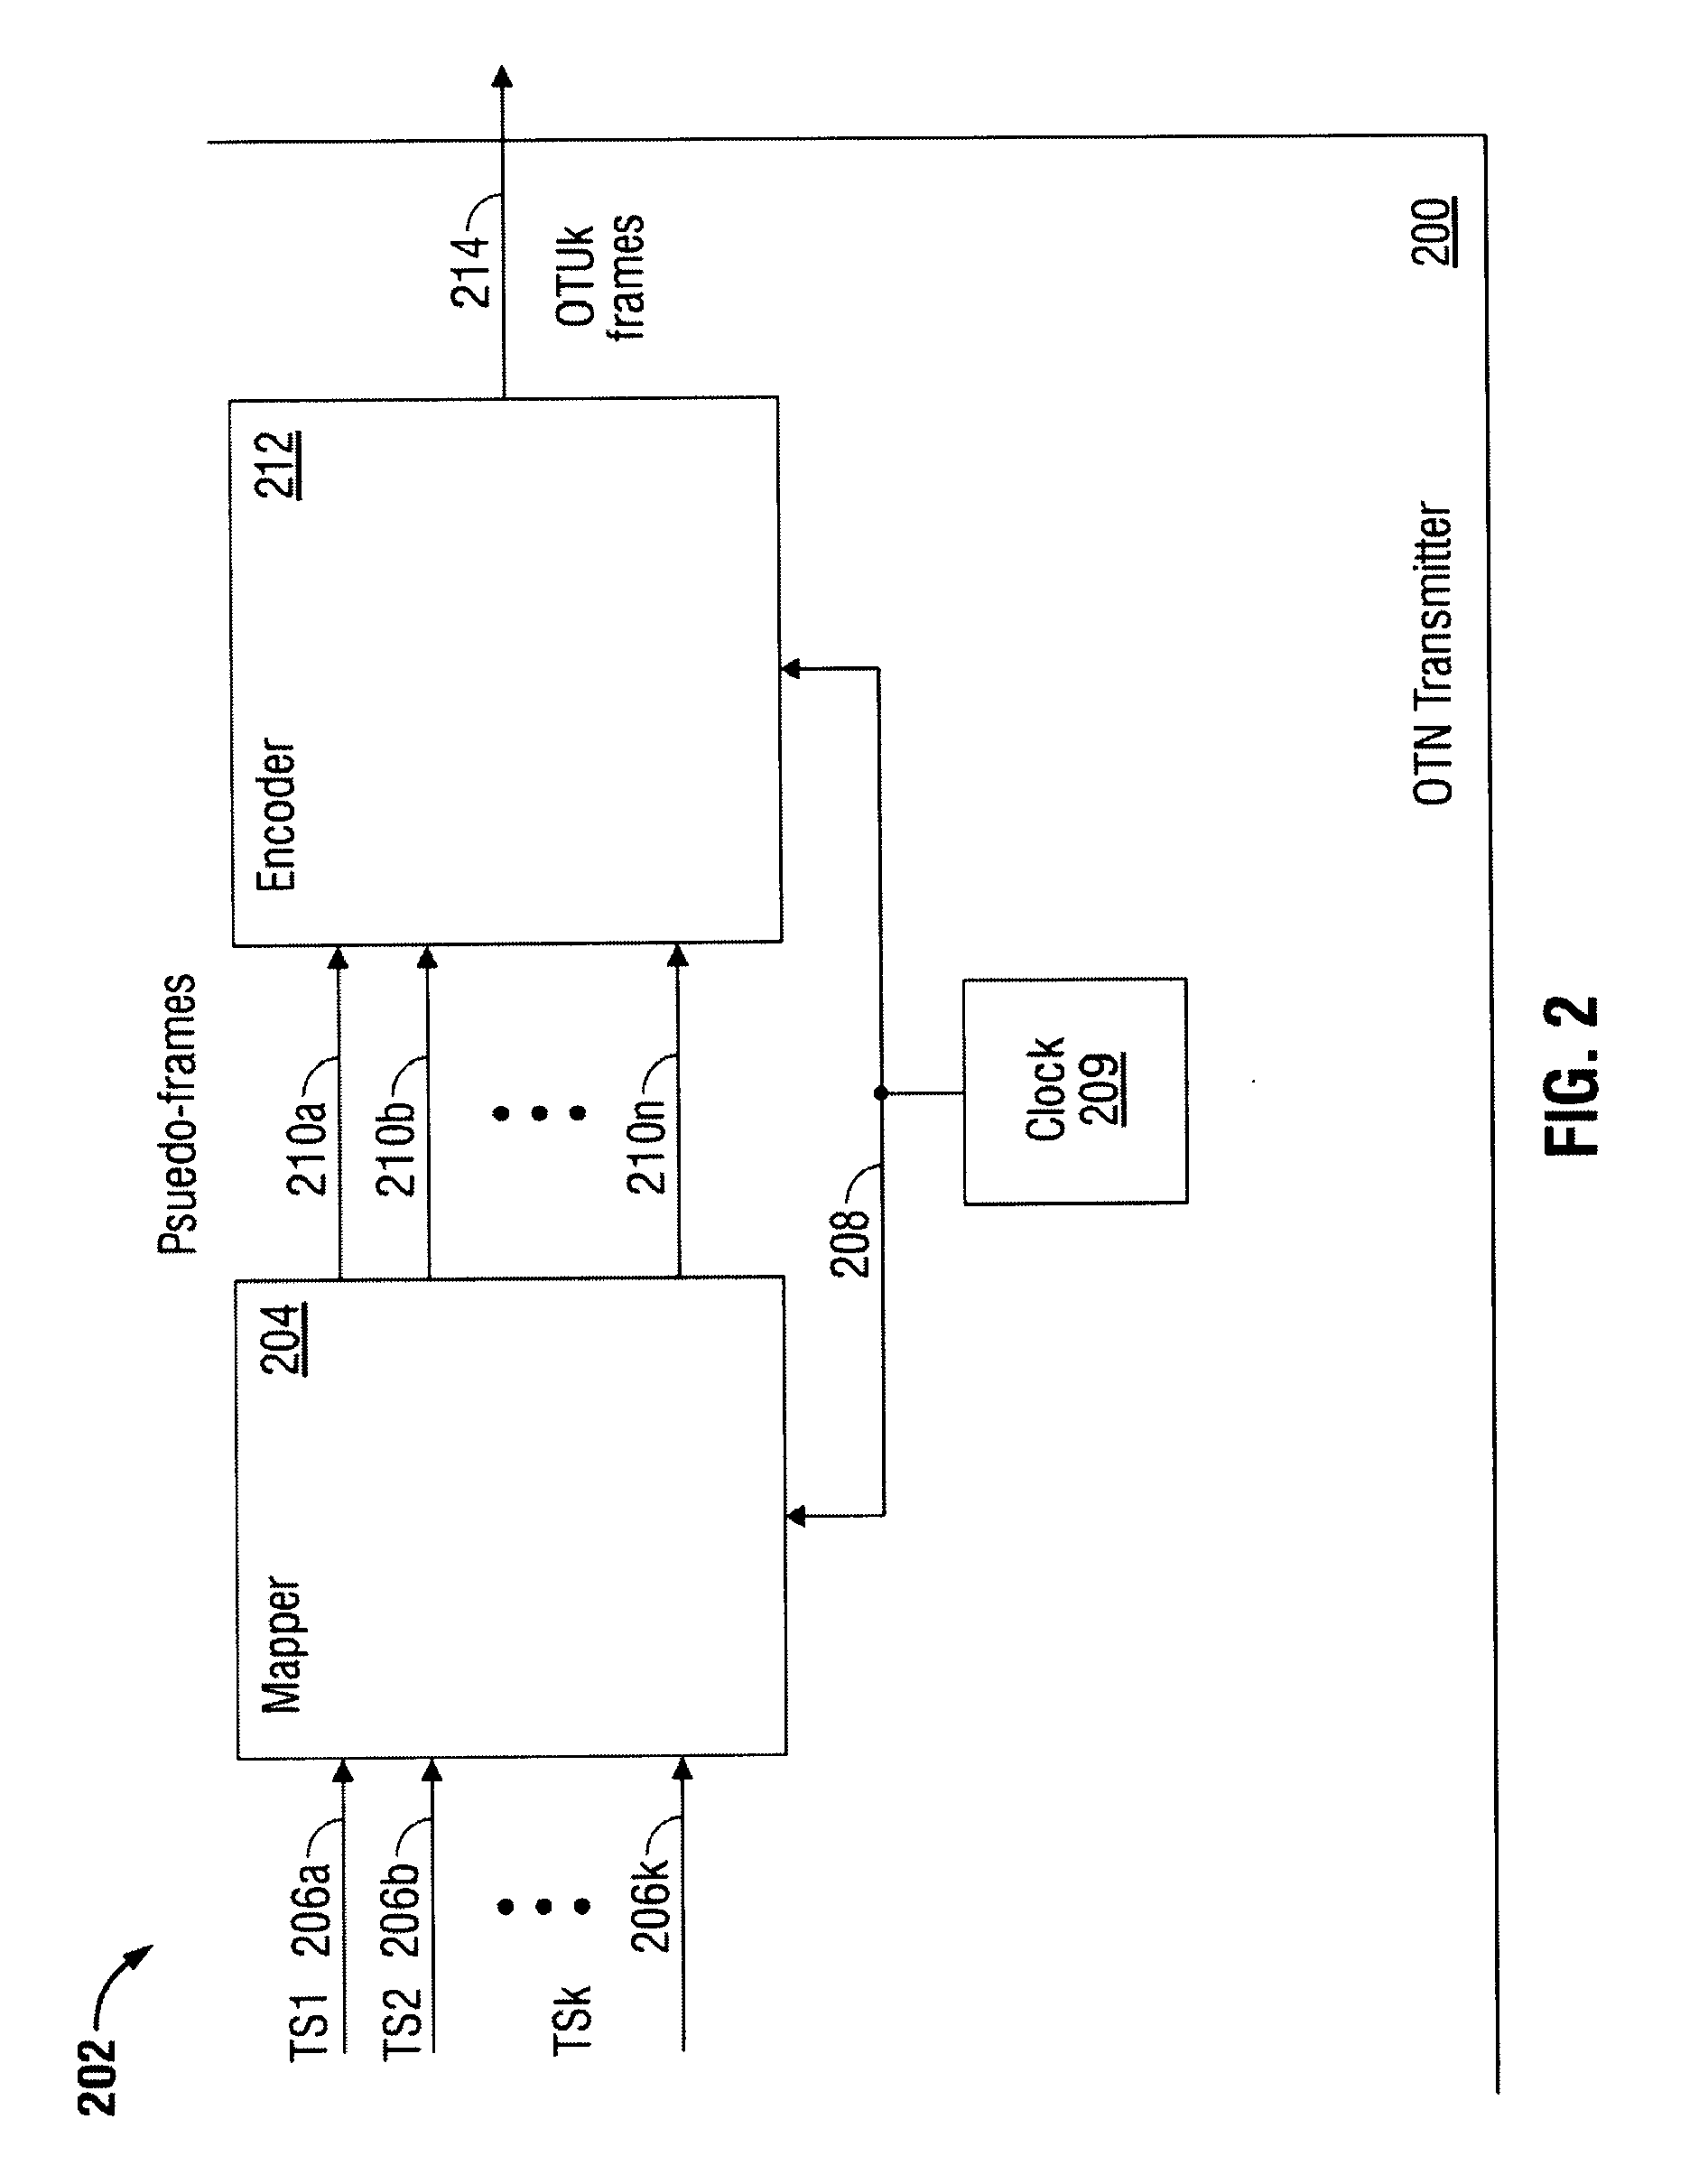 System and Method for Transporting Asynchronous ODUk Signals over a Synchronous Interface